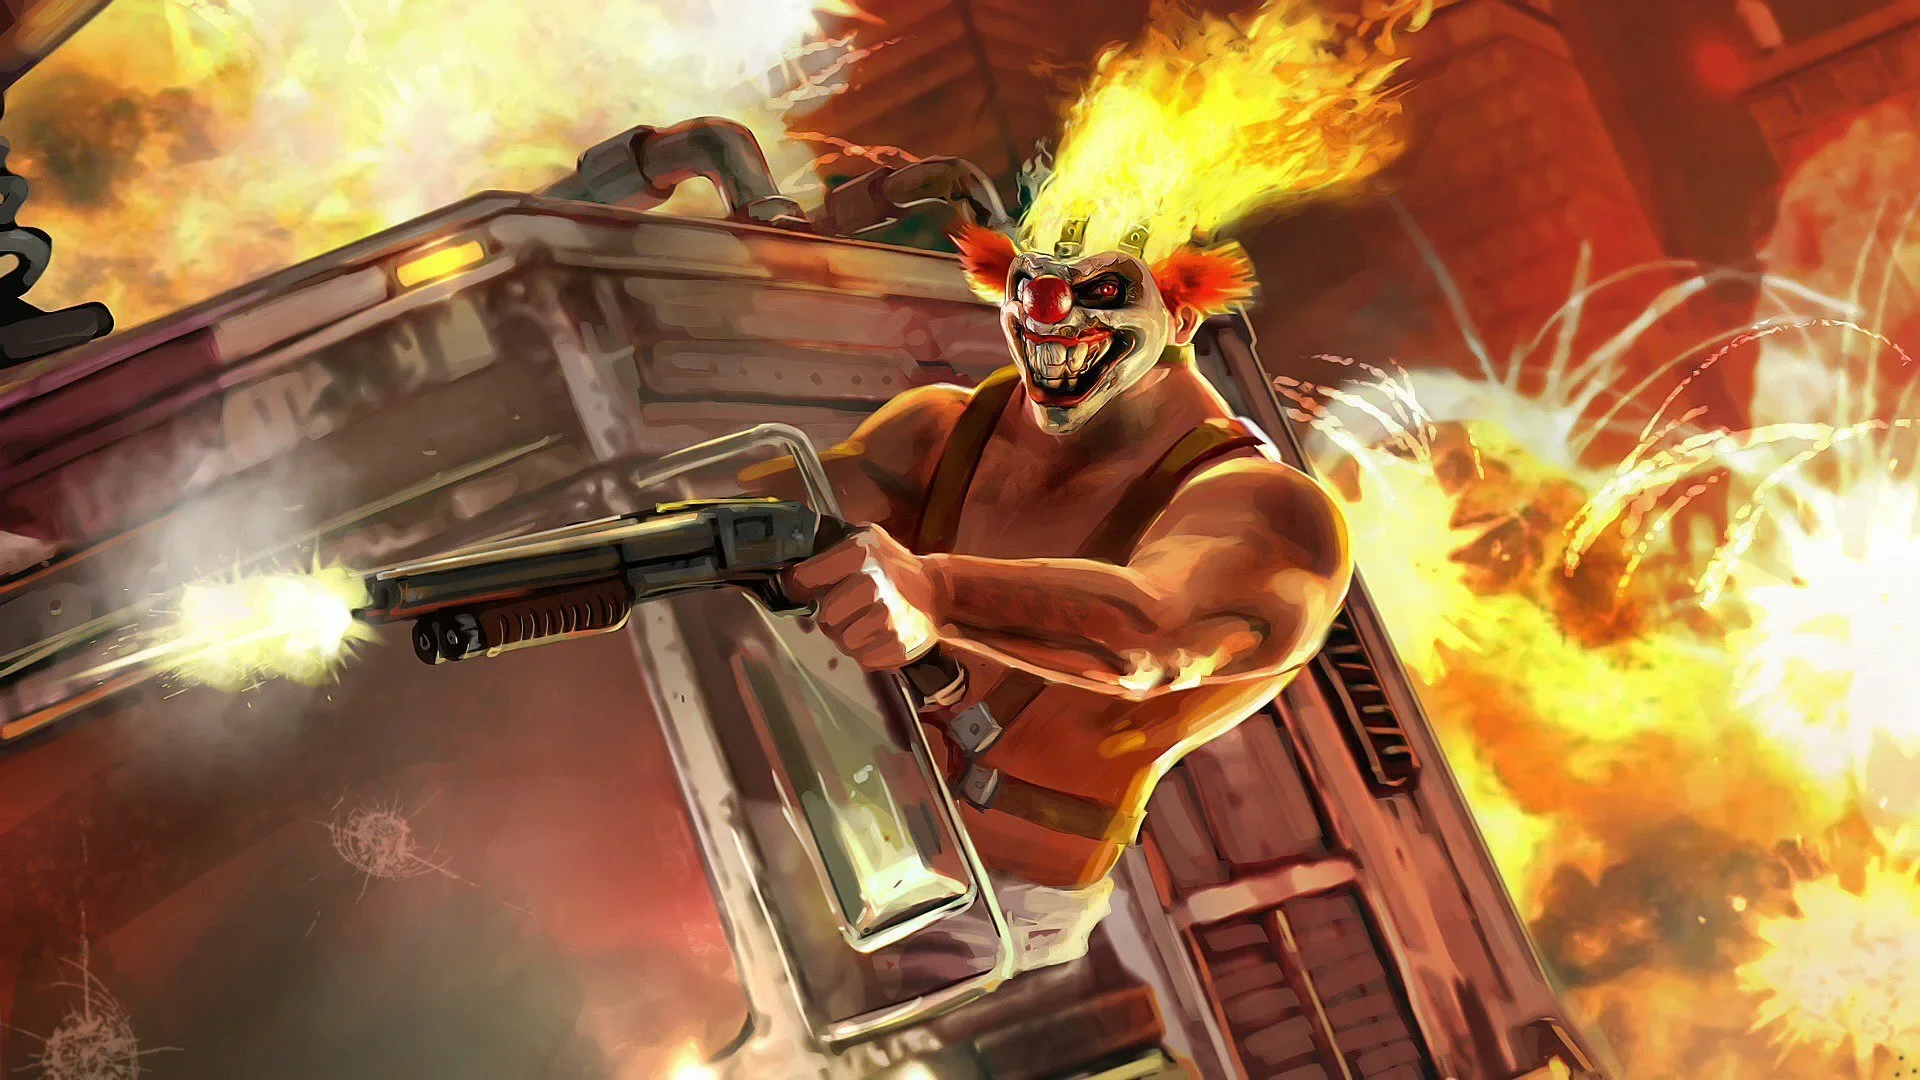 Insider: Sony will not release a new part of Twisted Metal